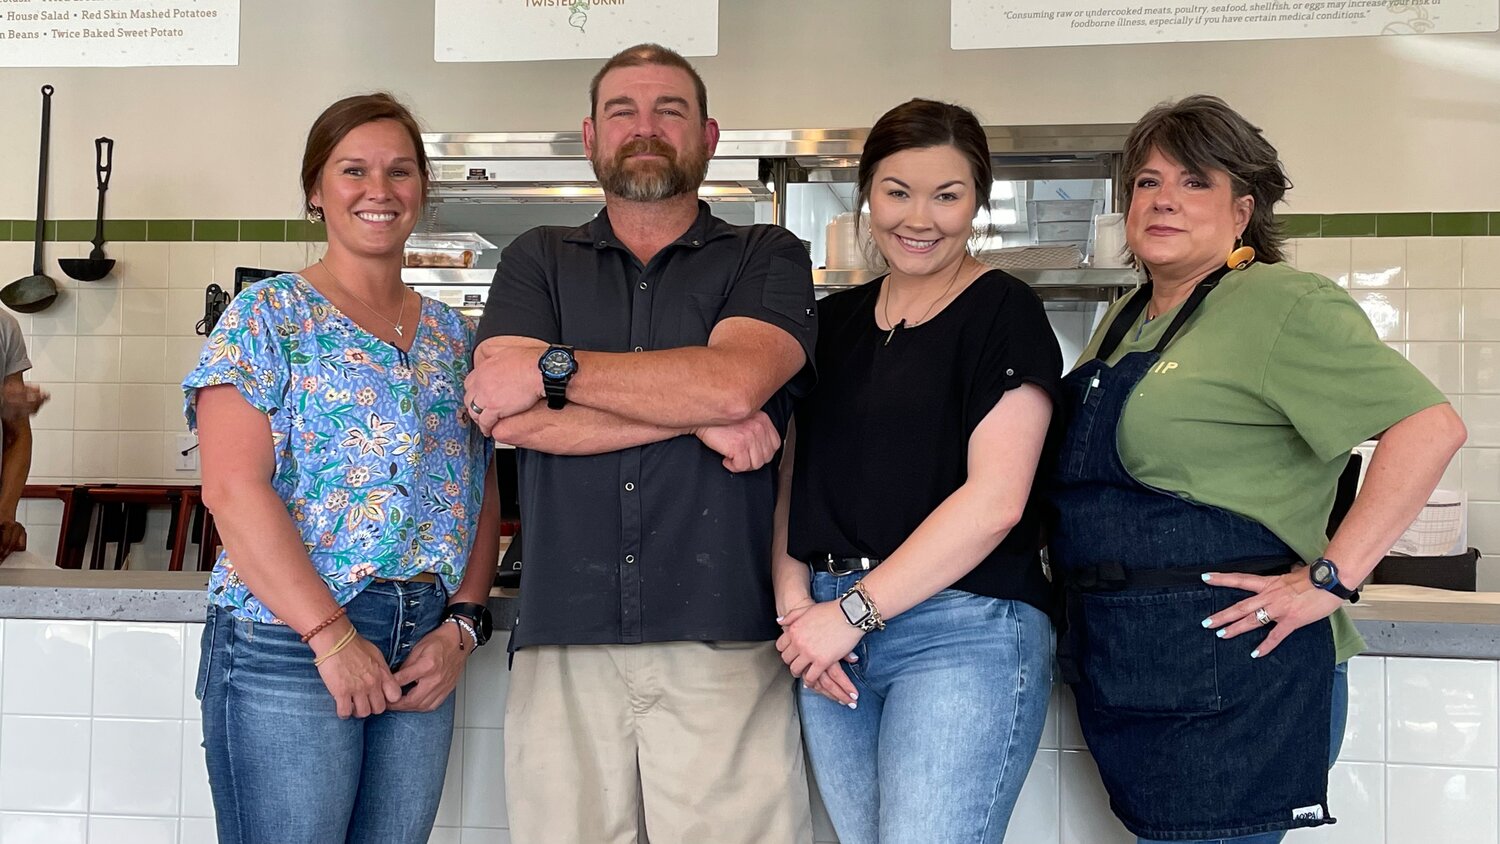 Twisted Turnip employees pose for a picture at the front counter. Pictured, from left: Barbie Pope, Billy Kistler, Cassidy Scott, and Janine Cooper.